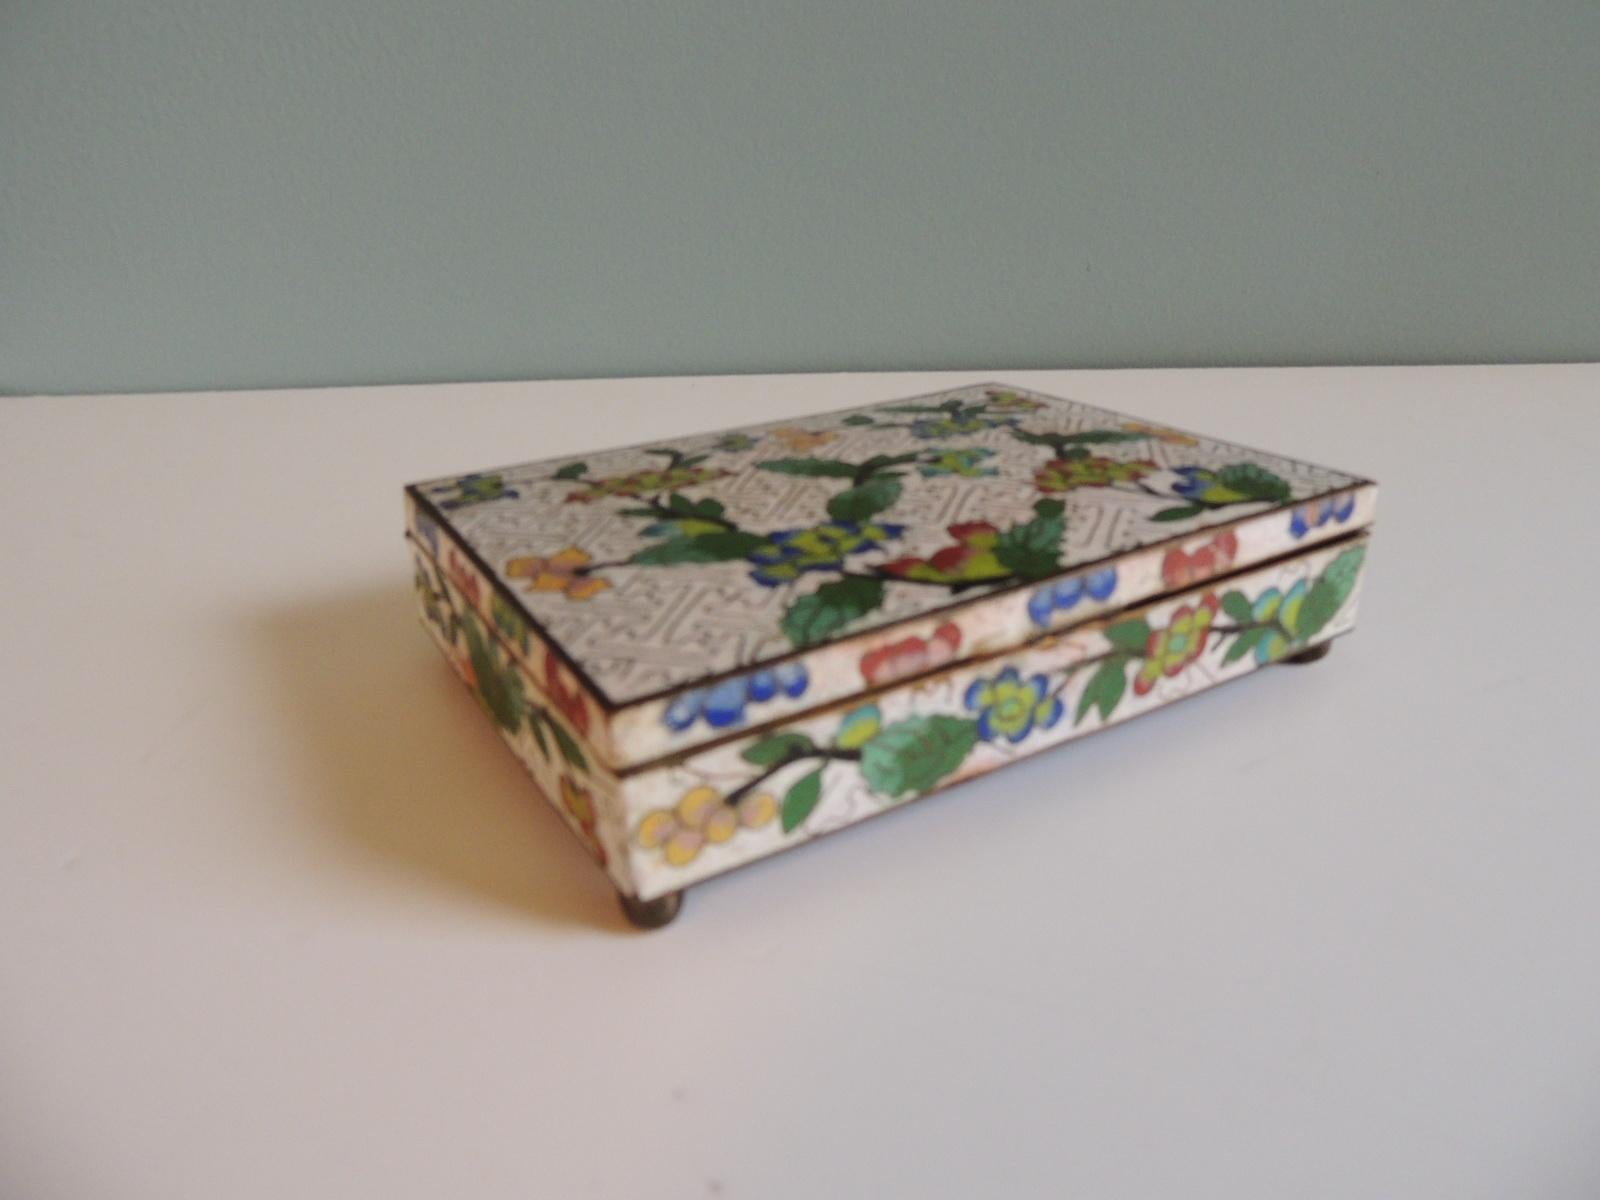 Vintage Cloisonné brass and enamel decorative footed box depicting flowers and meandering borders
Cobalt blue enamel inside compartments.
Size: 6 x 4.5 x 1.5.